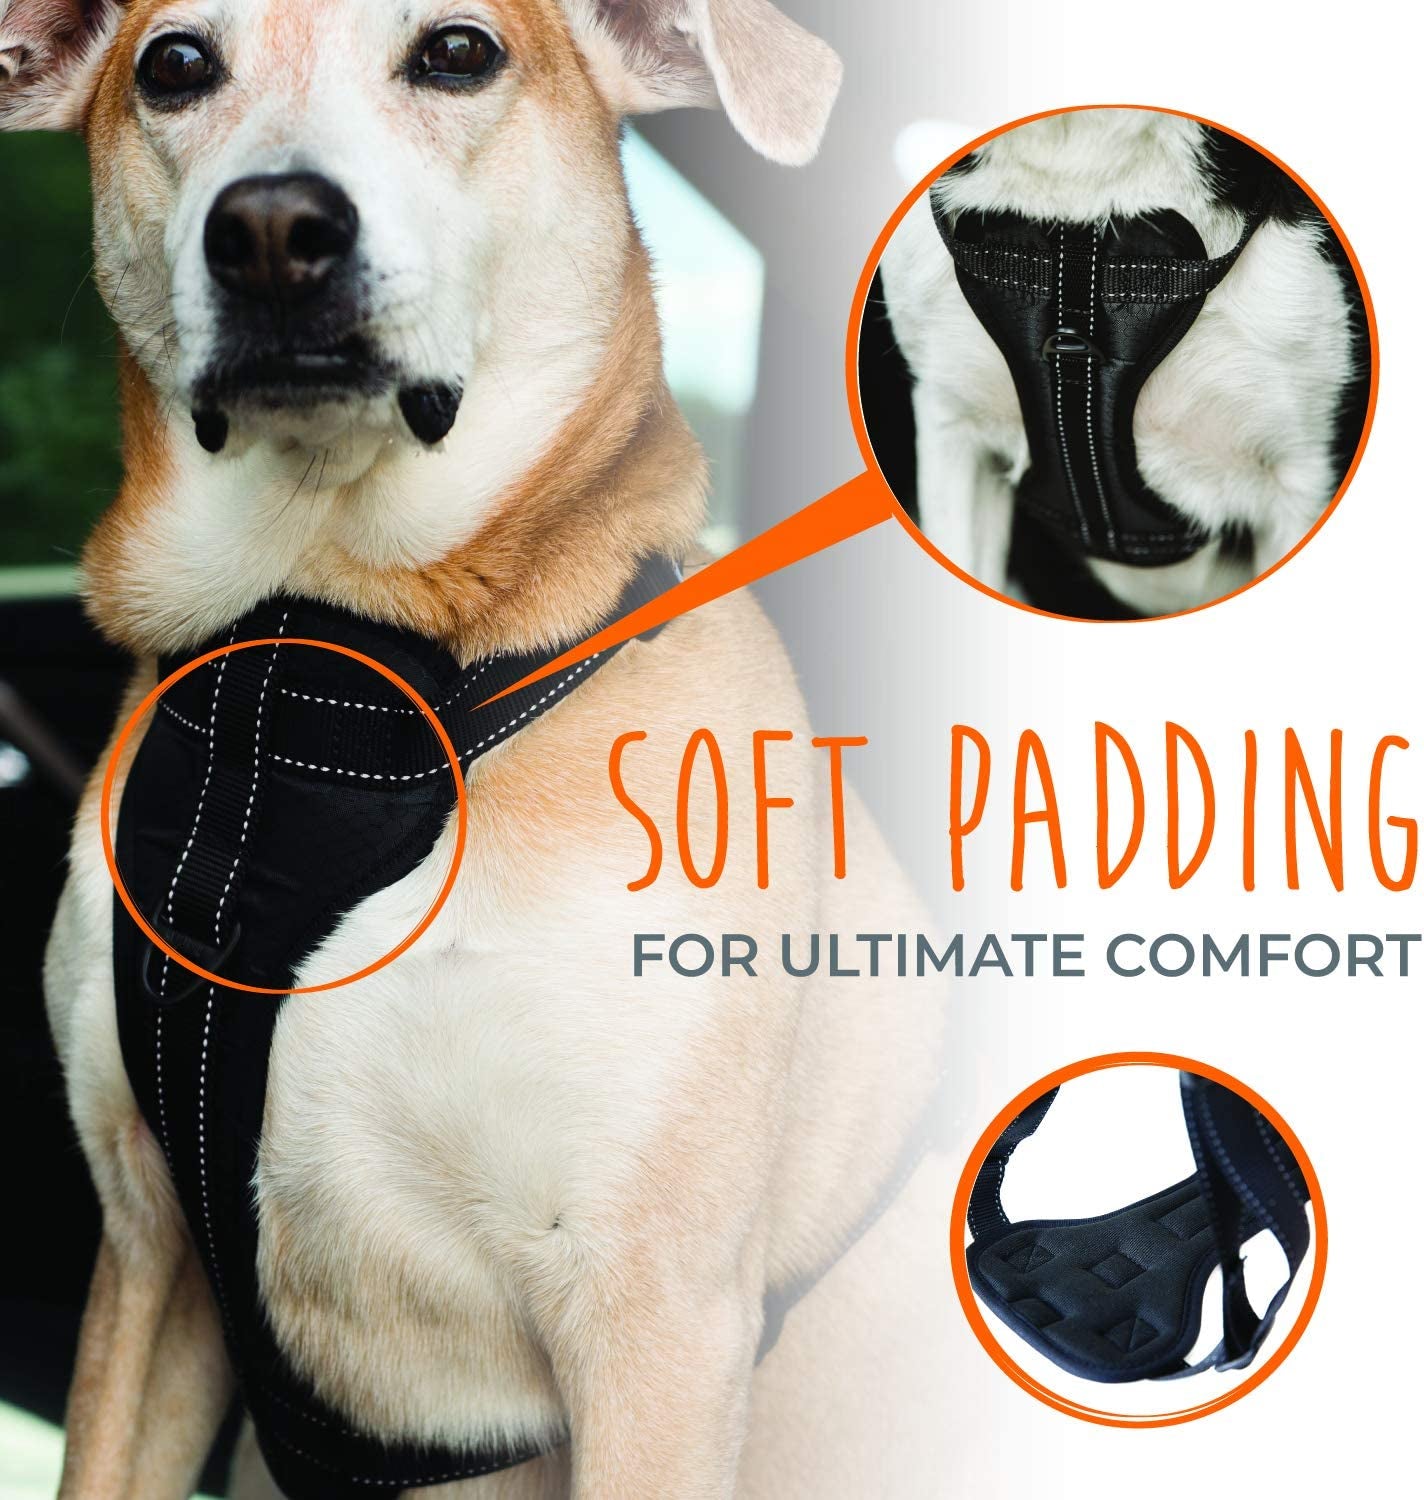 Car Dog Harness, Vehicle Safety Harness with Adjustable Straps and Soft Padding, Doubles as a Standard Harness with a No Pull Front Leash Attachment